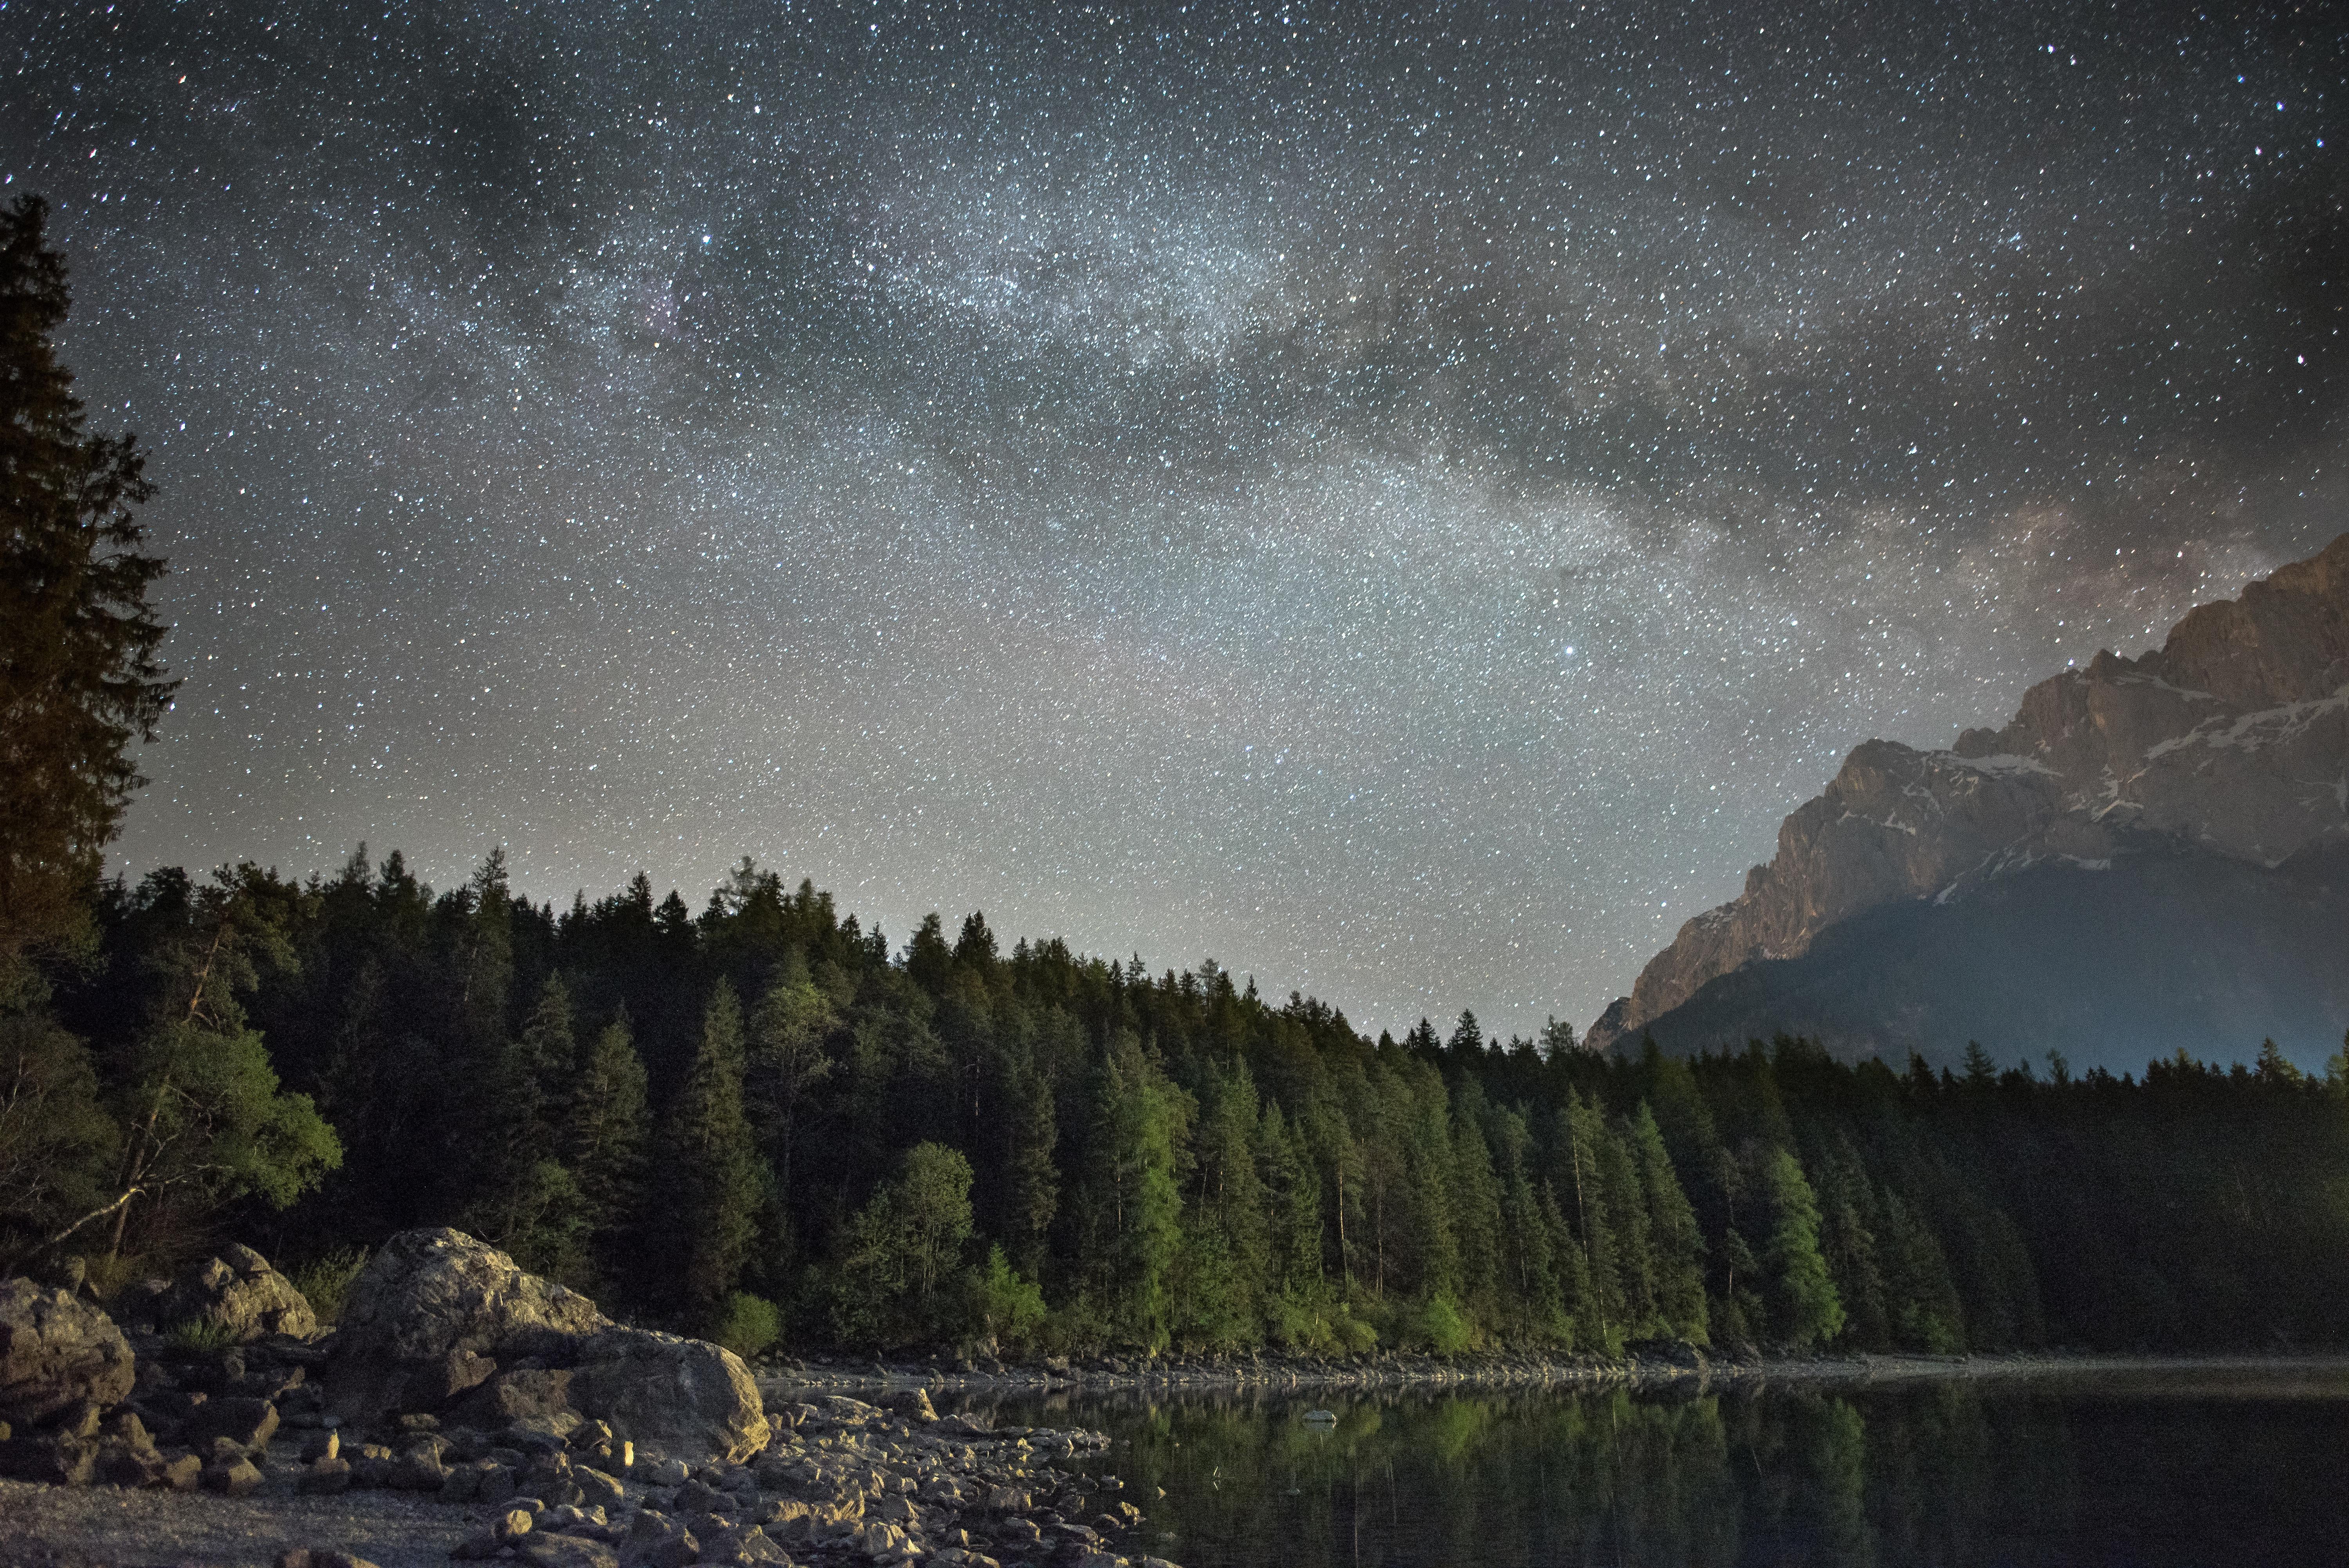 green trees, forest, starry night, lake, mountains, landscape